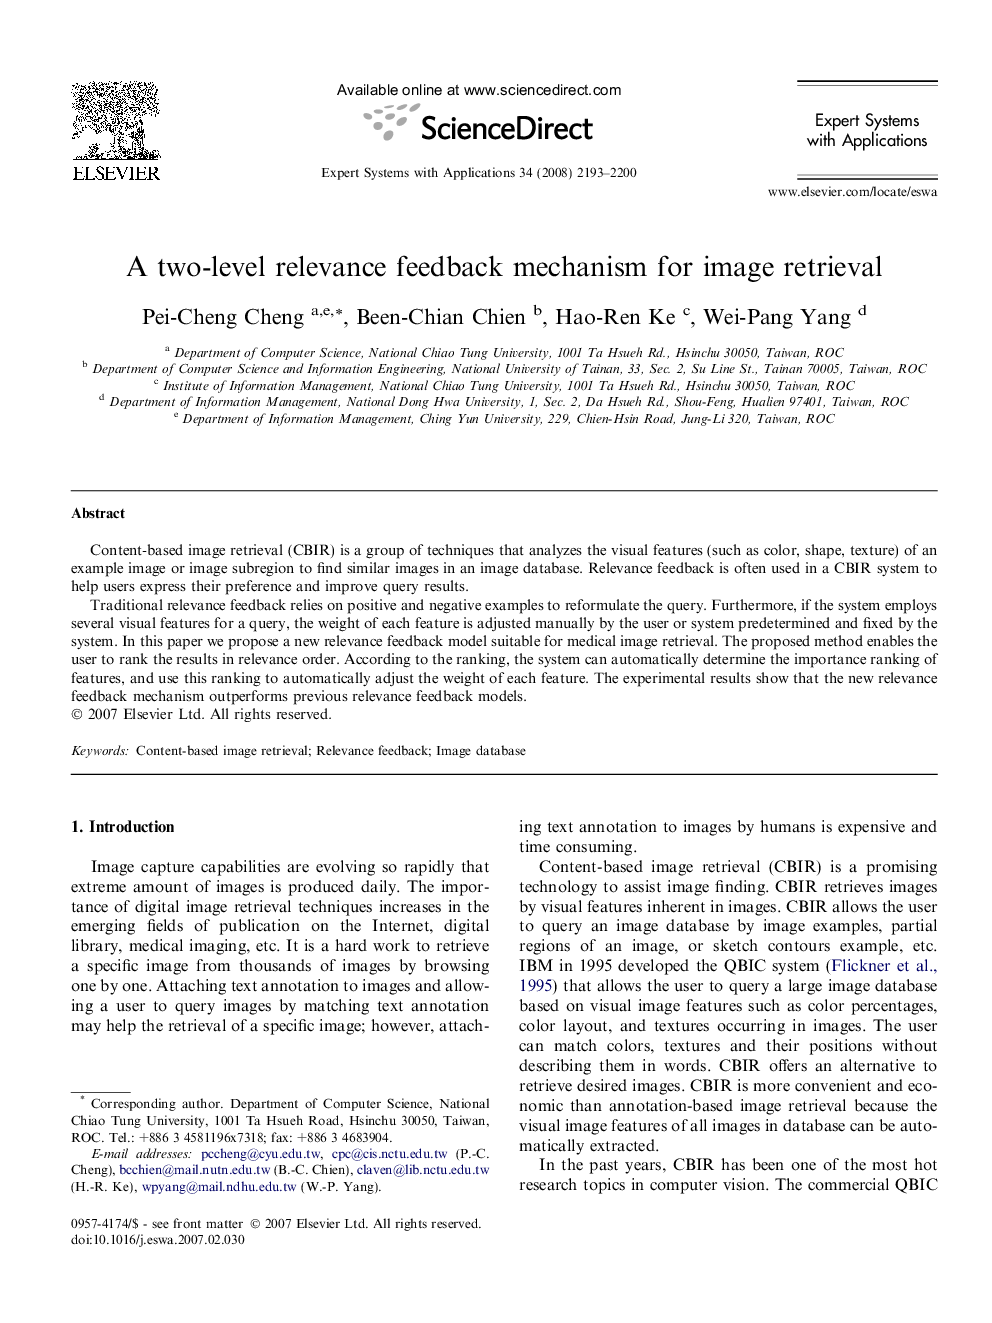 A two-level relevance feedback mechanism for image retrieval